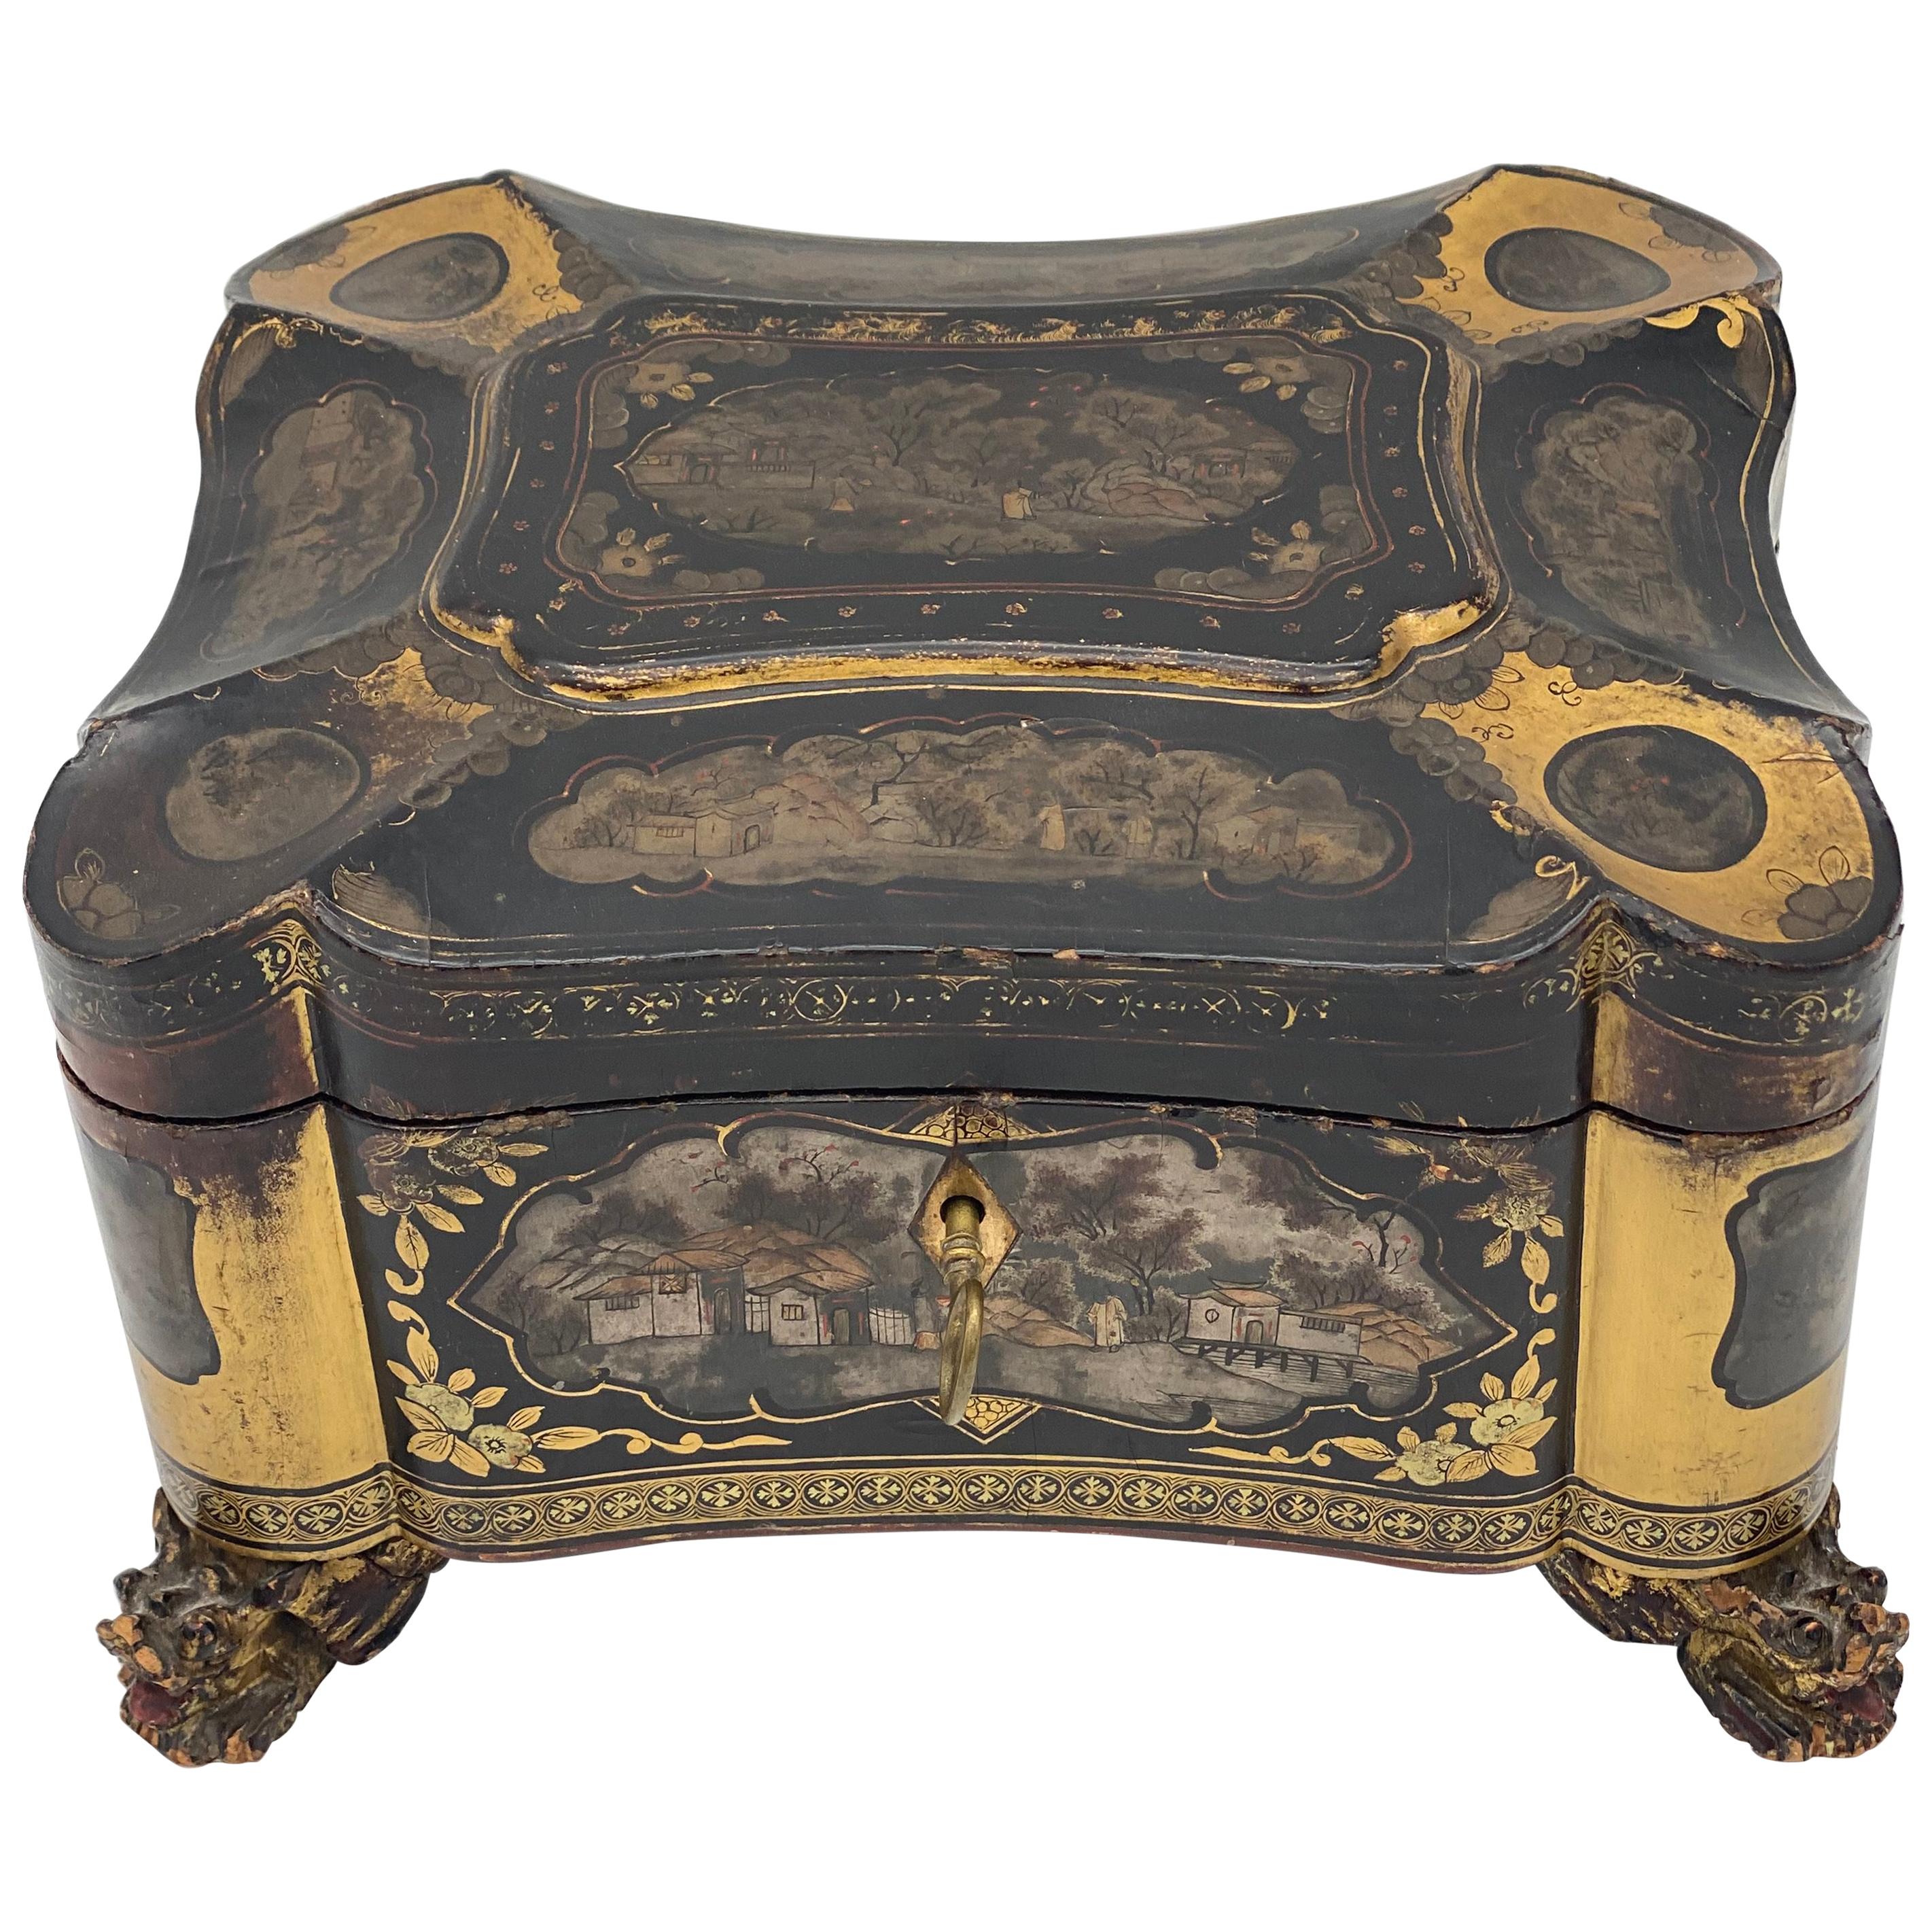 19th Century Gilt Lacquer Chinese Tea Caddy